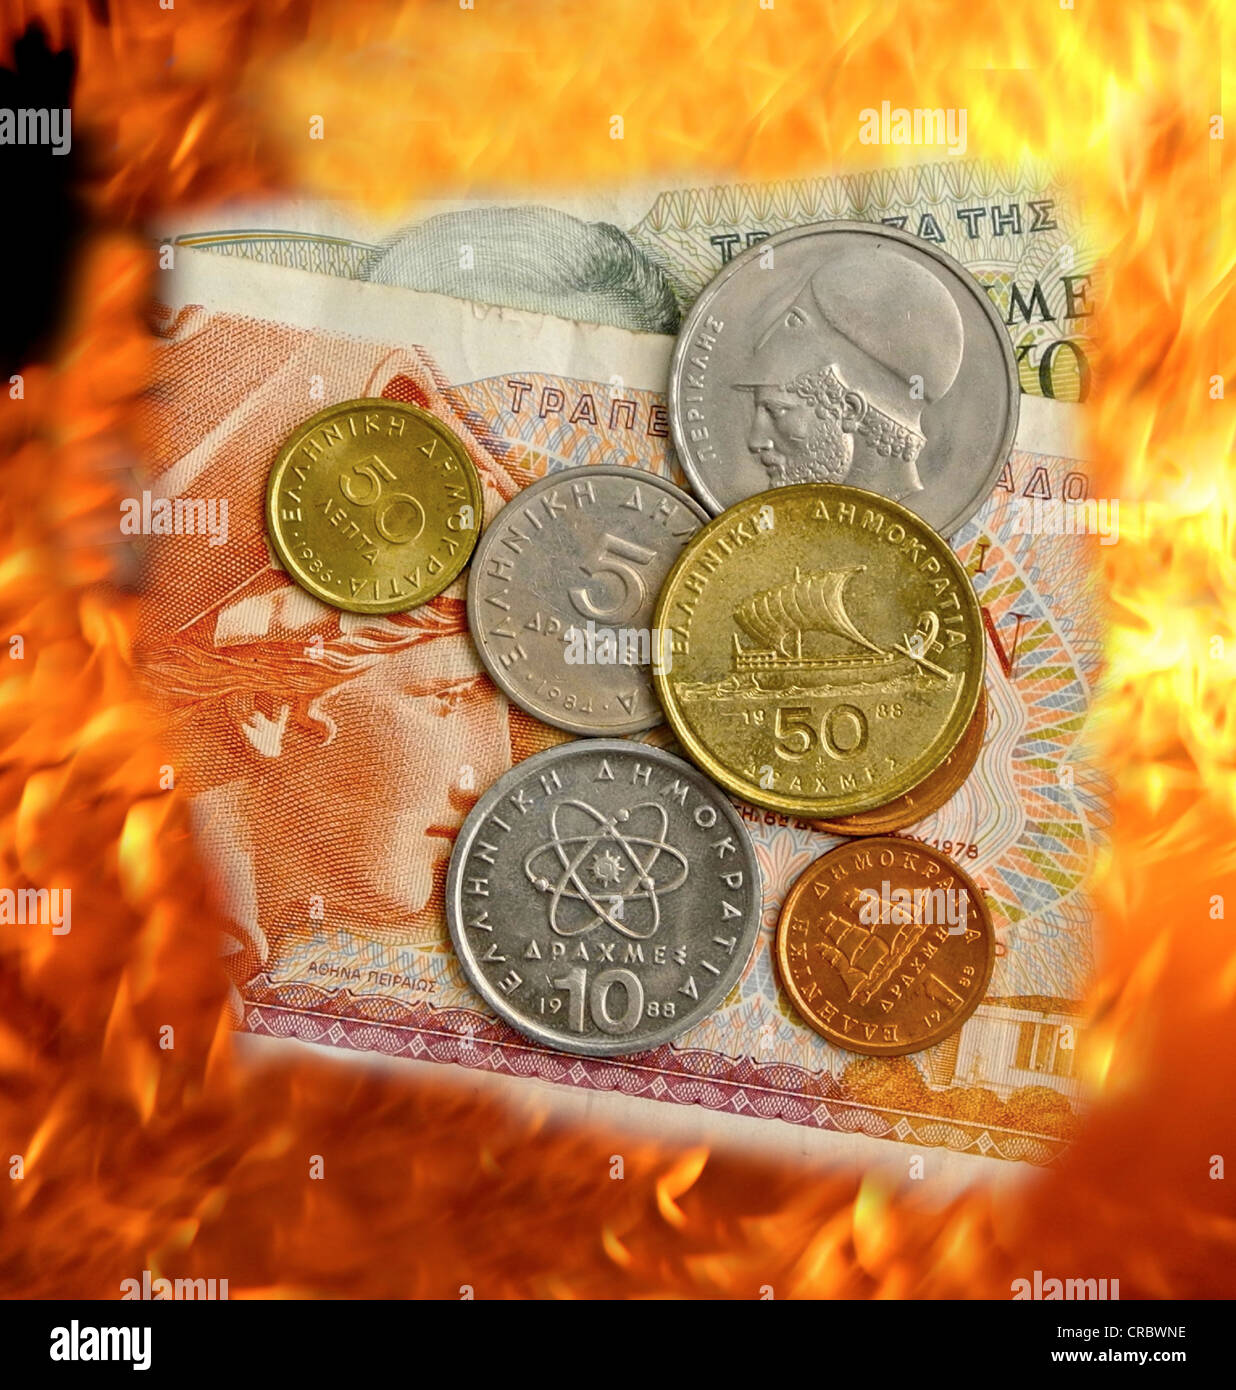 Drachma burning in flames Greek currency Stock Photo